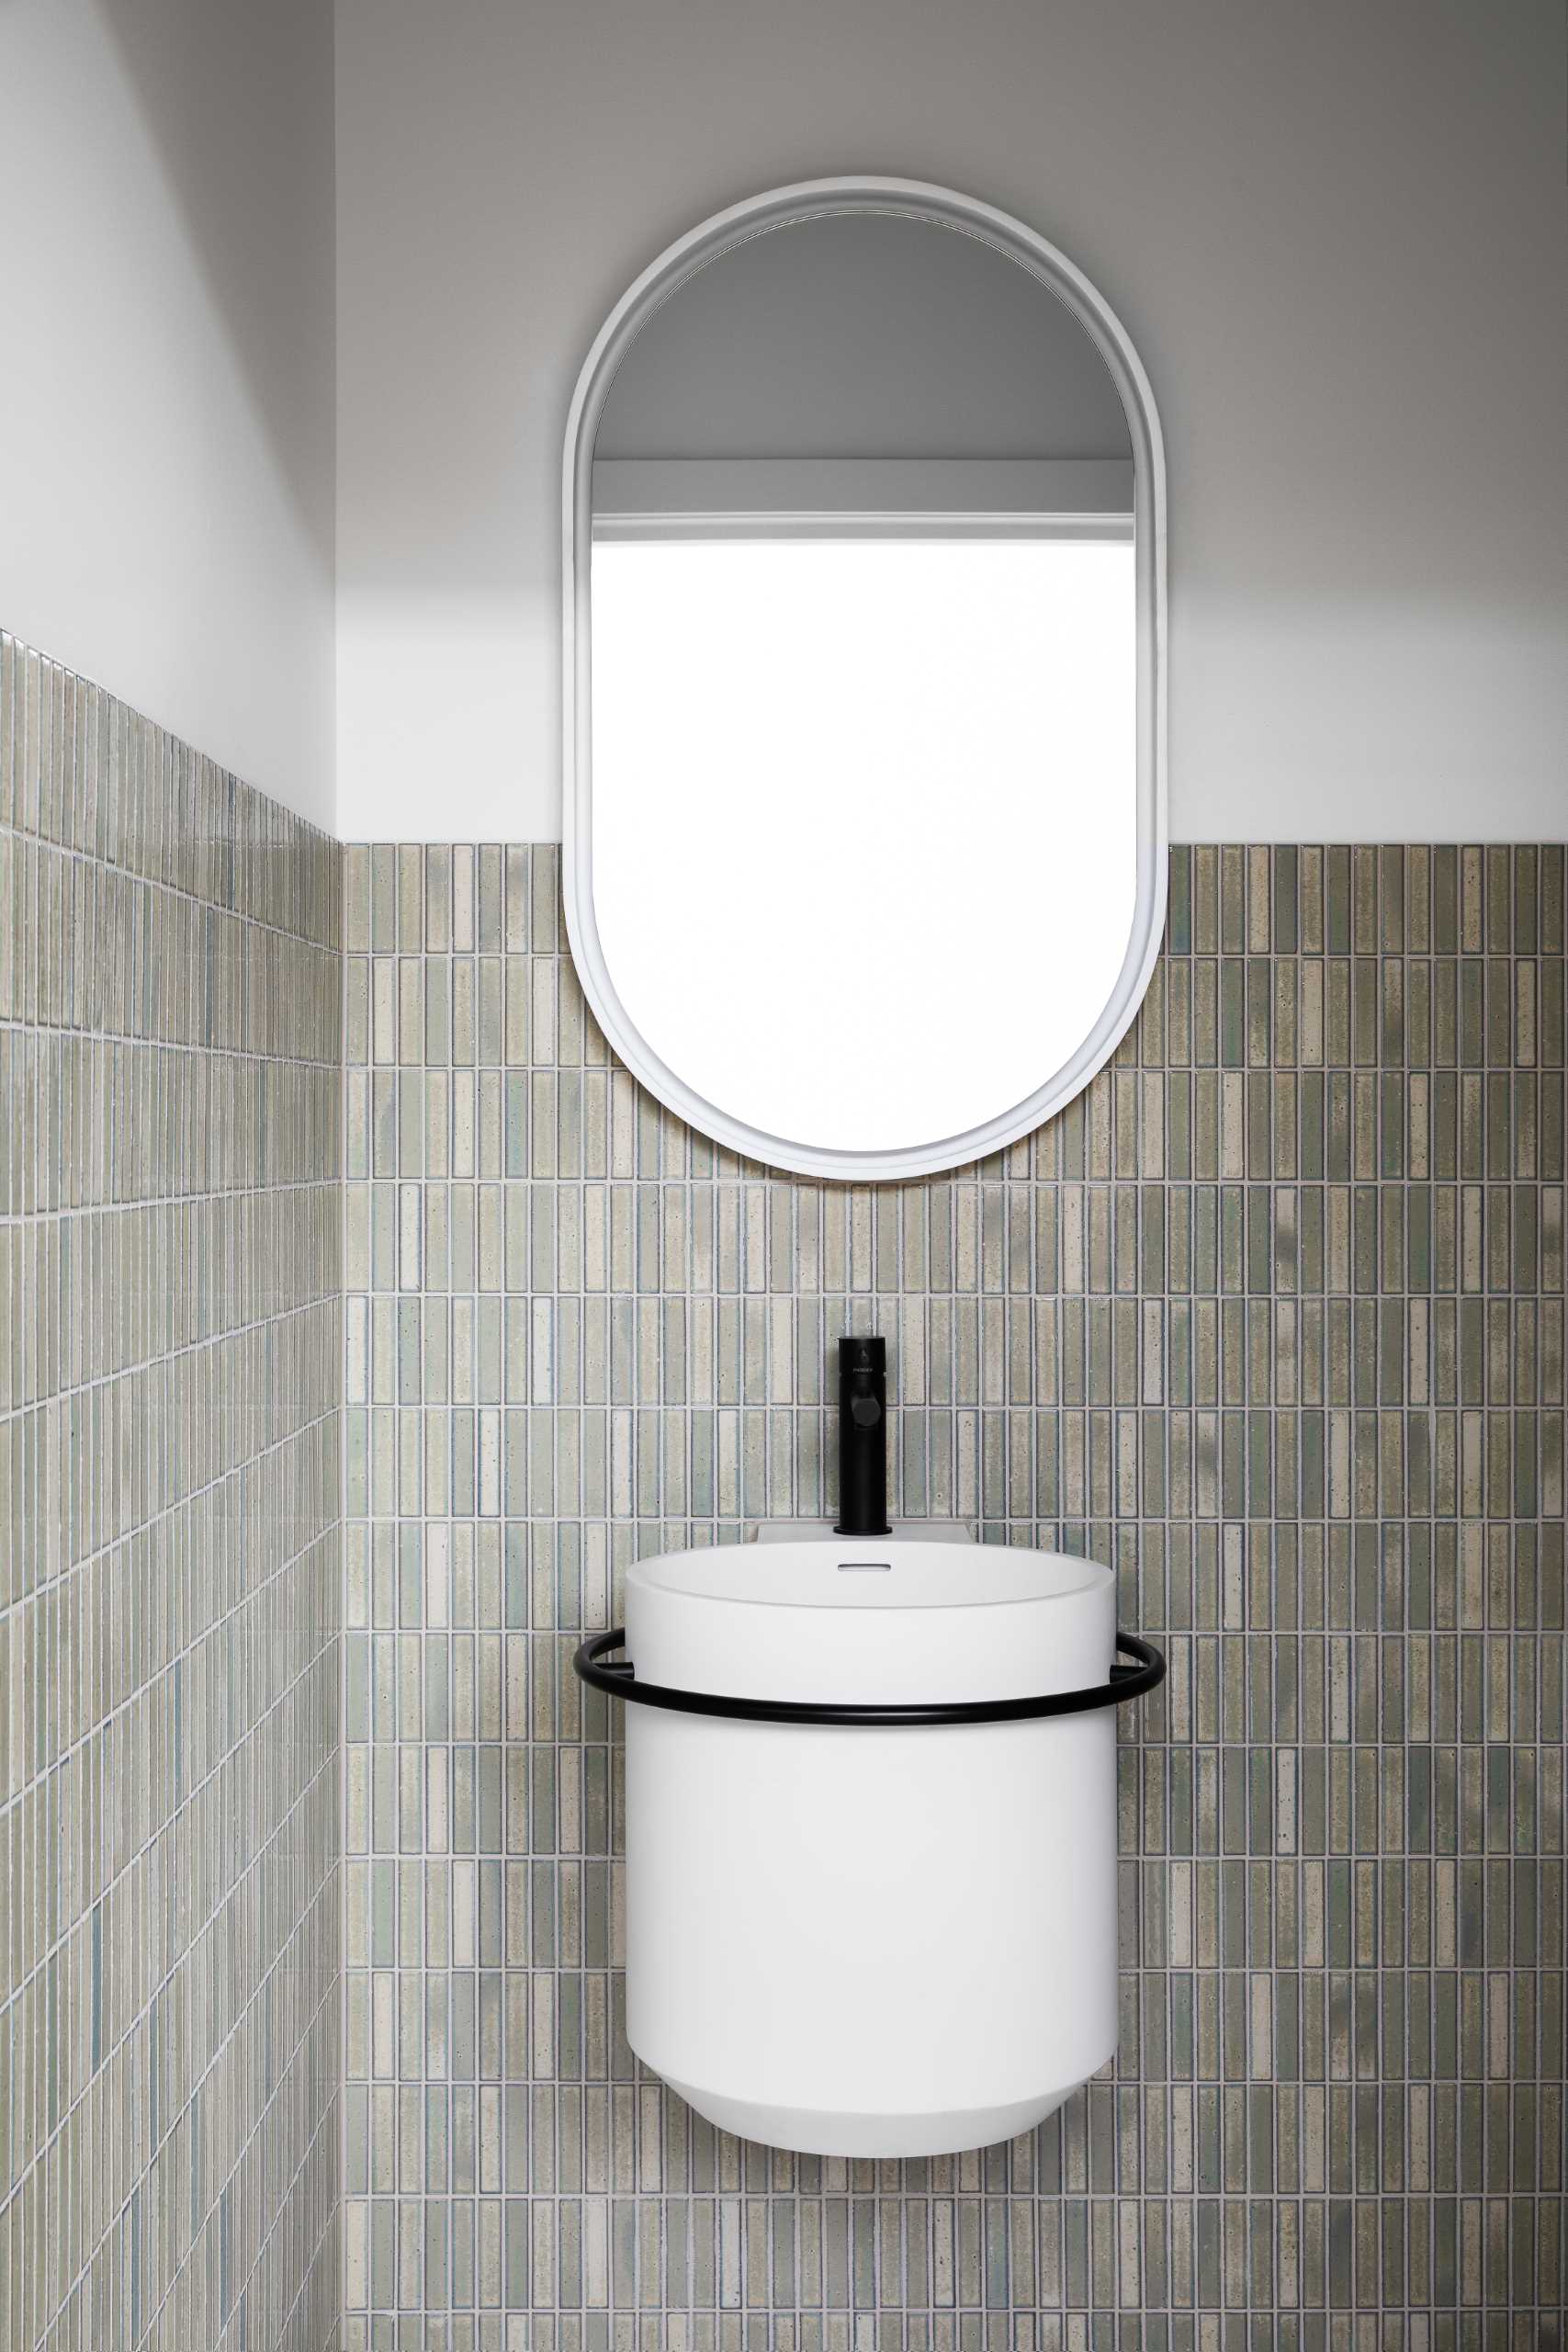 In this powder room, a floating basin is mounted below the mirror and has small rectangular tiles that cover the lower part of the wall.